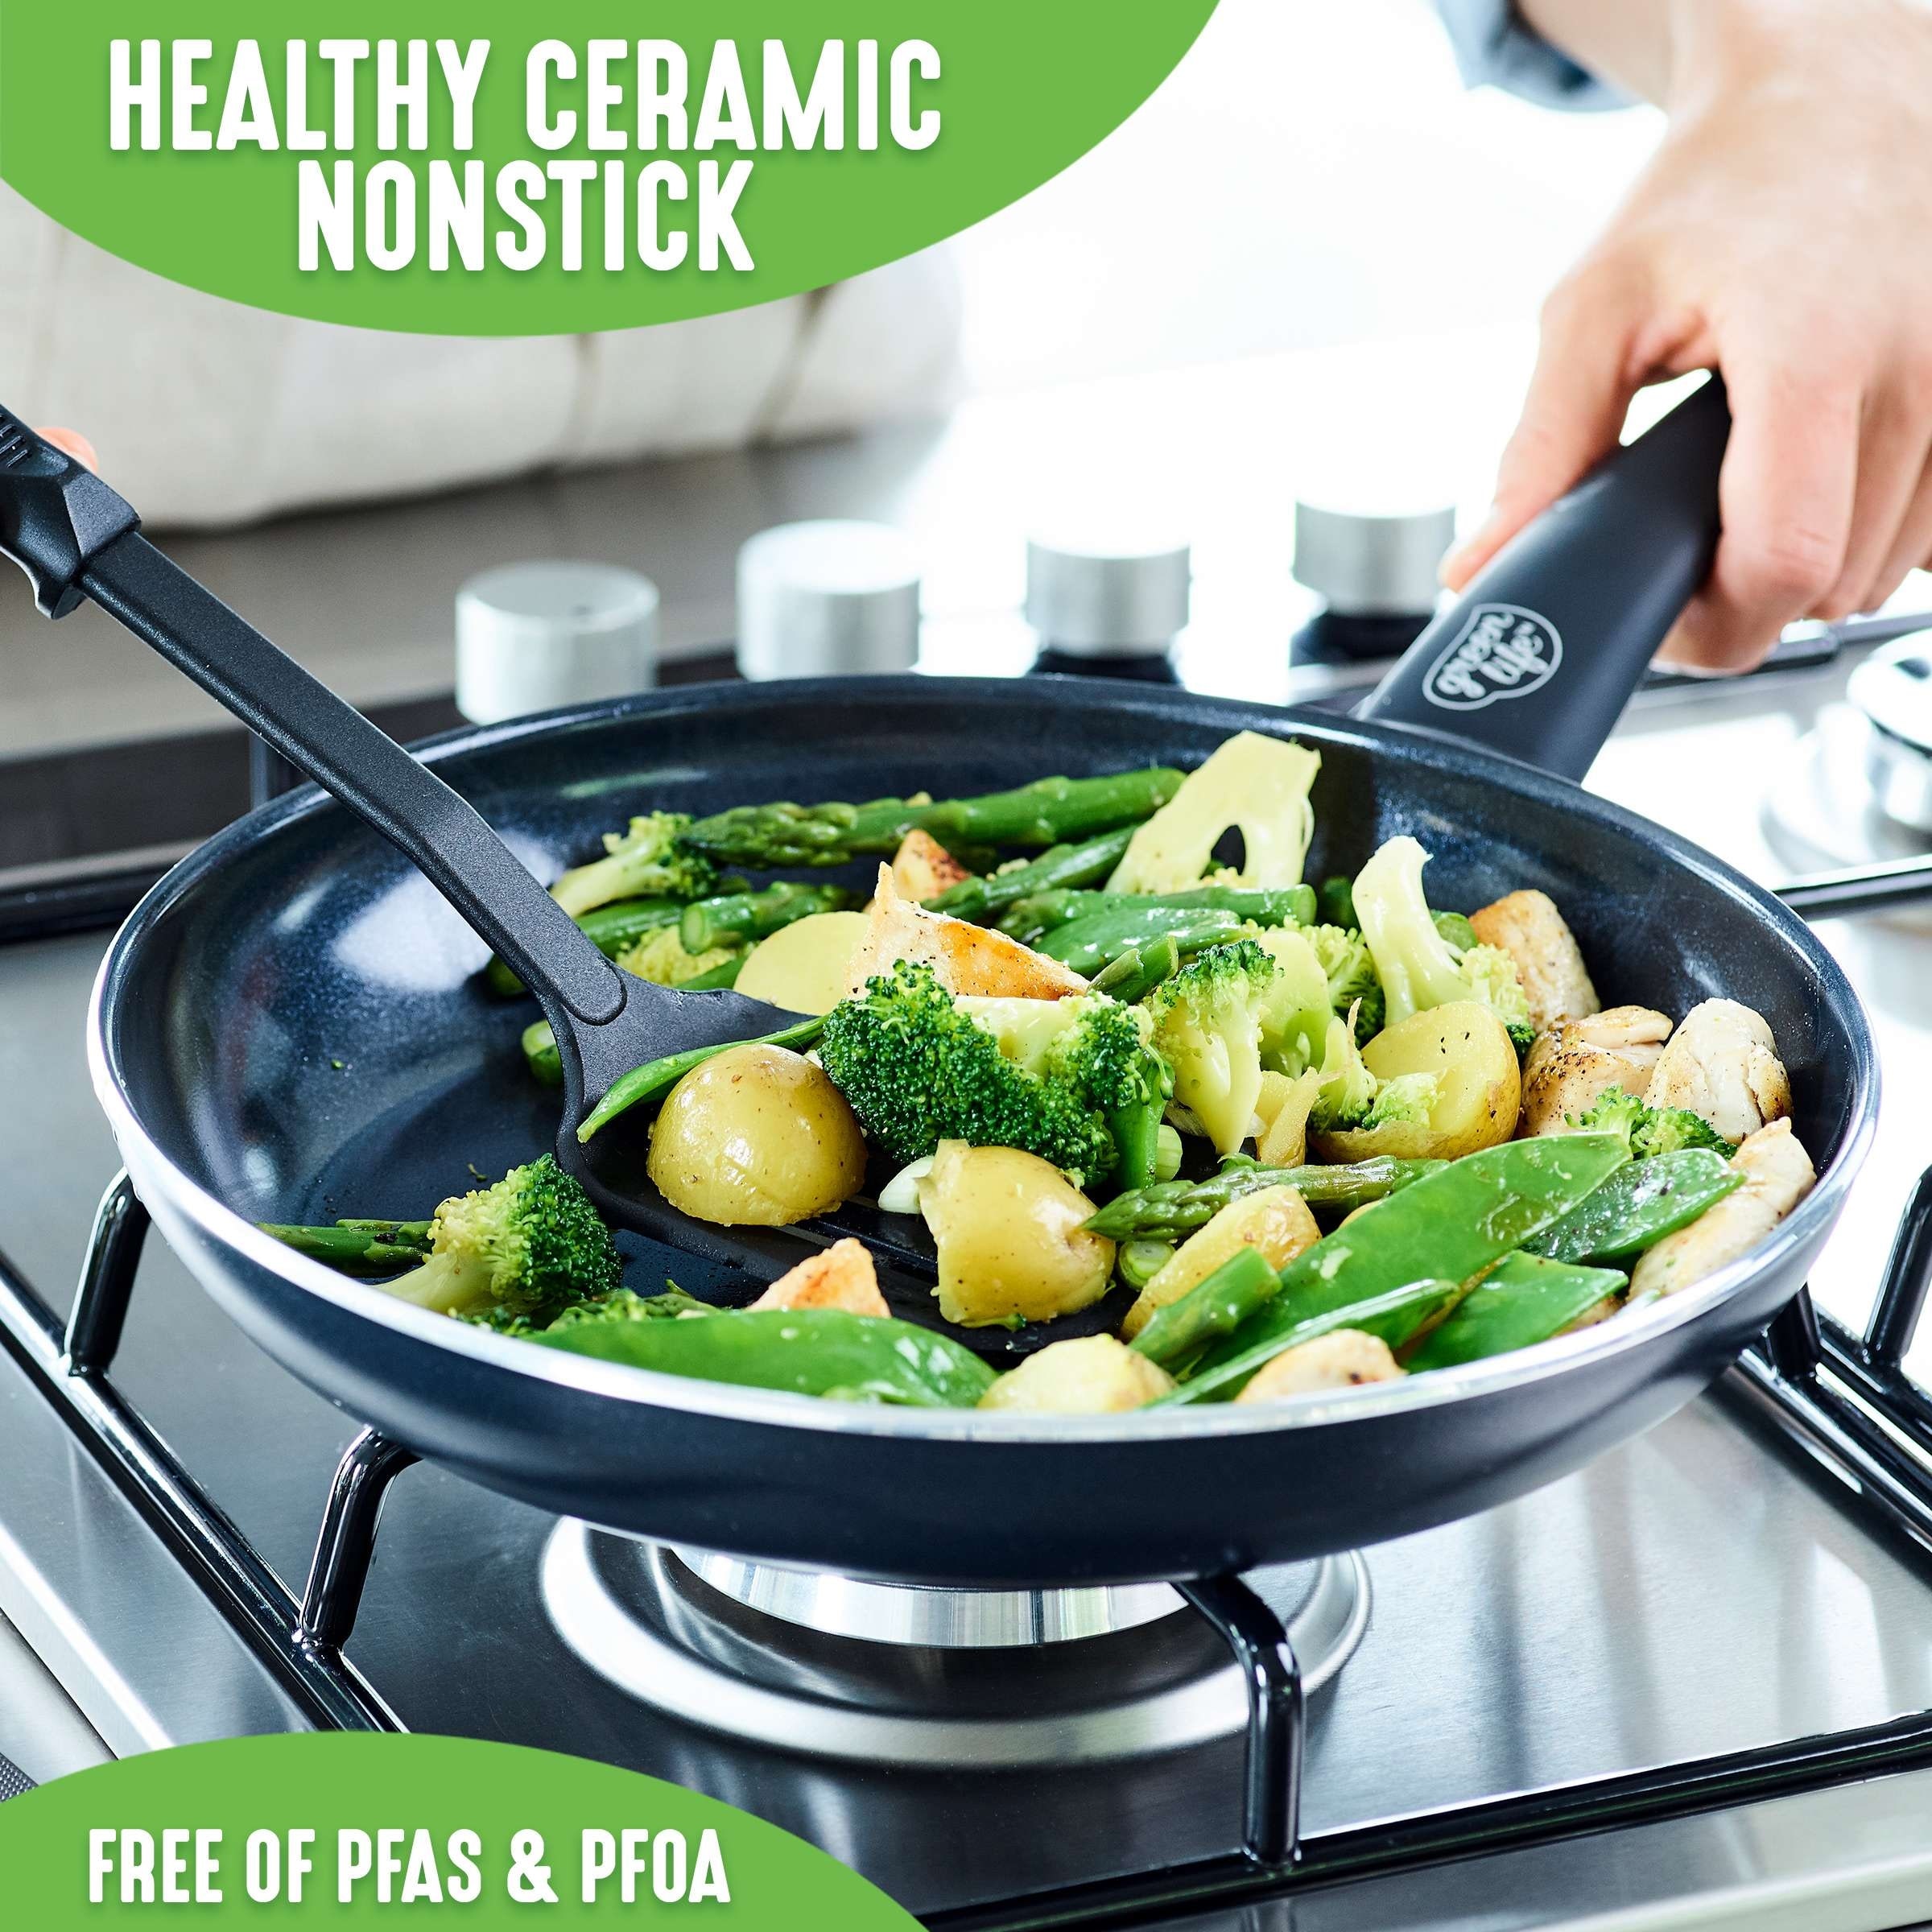 GreenLife Soft Grip Healthy Ceramic Nonstick Fry Pan Set of 3